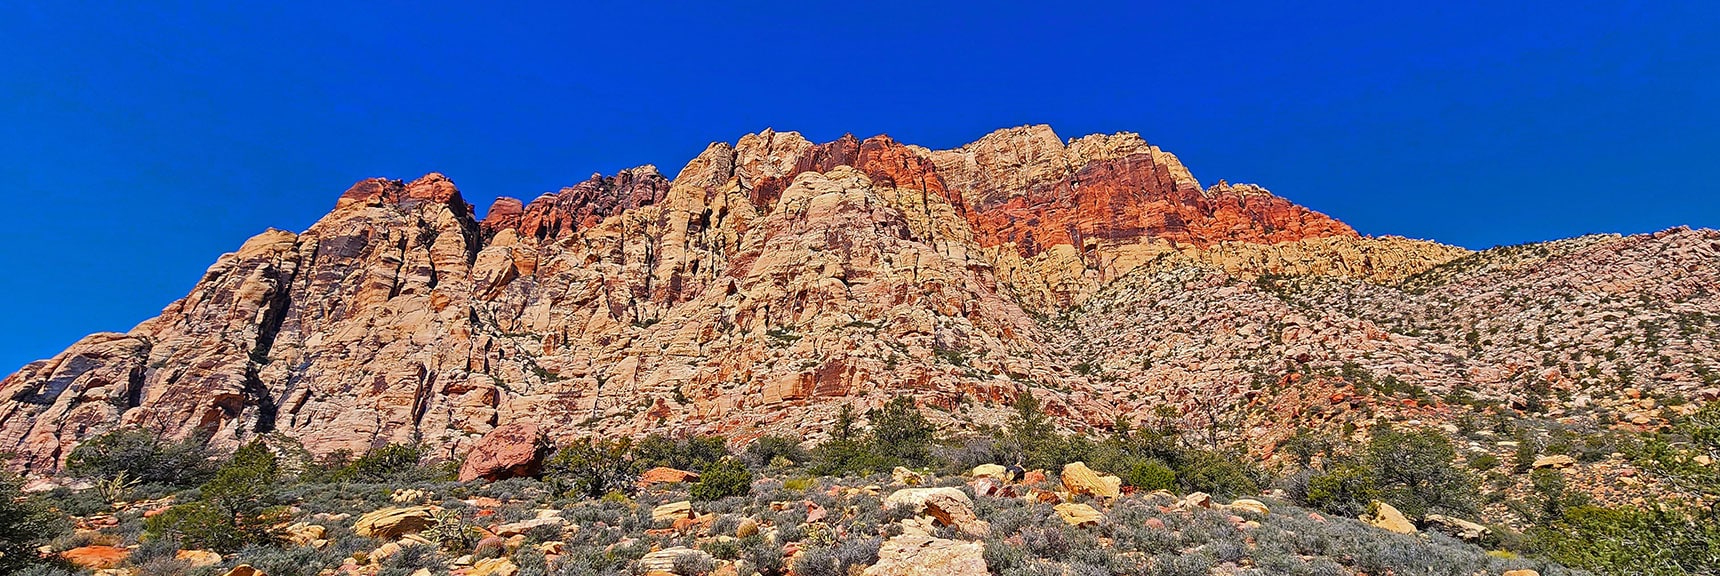 Trail Skirts Along the Eastern Base of Bridge Mountain | Dales Trail | Red Rock Canyon National Conservation Area, Nevada | David Smith | LasVegasAreaTrails.com